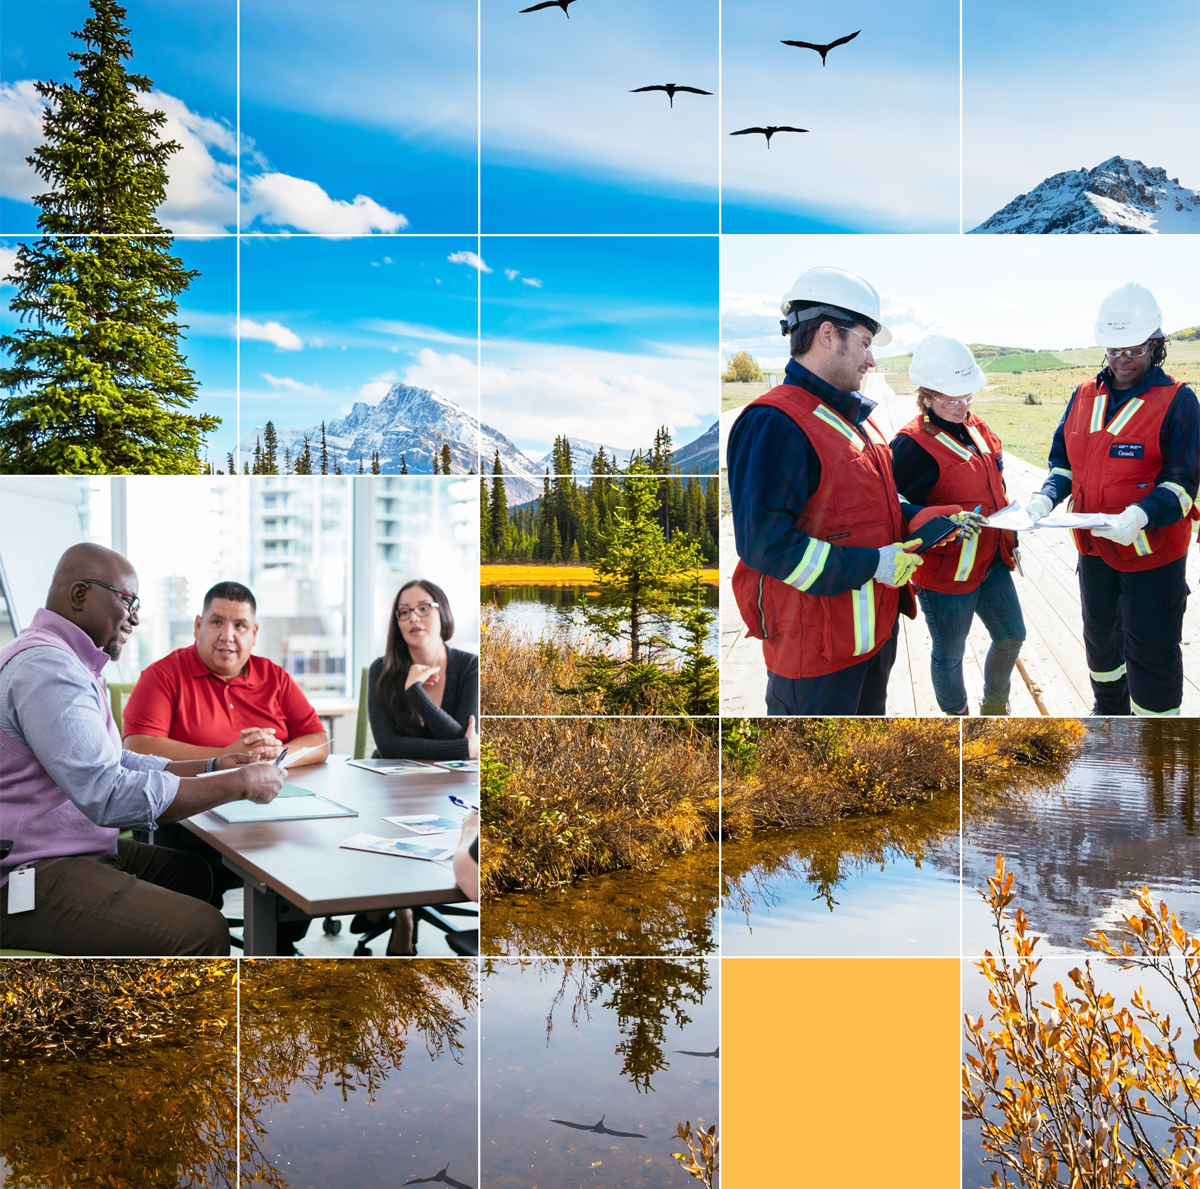 Mountains with blue sky, pine trees, a river and vegetation in autumn; three CER inspectors comparing notes; three people having a discussion at a table at the CER.